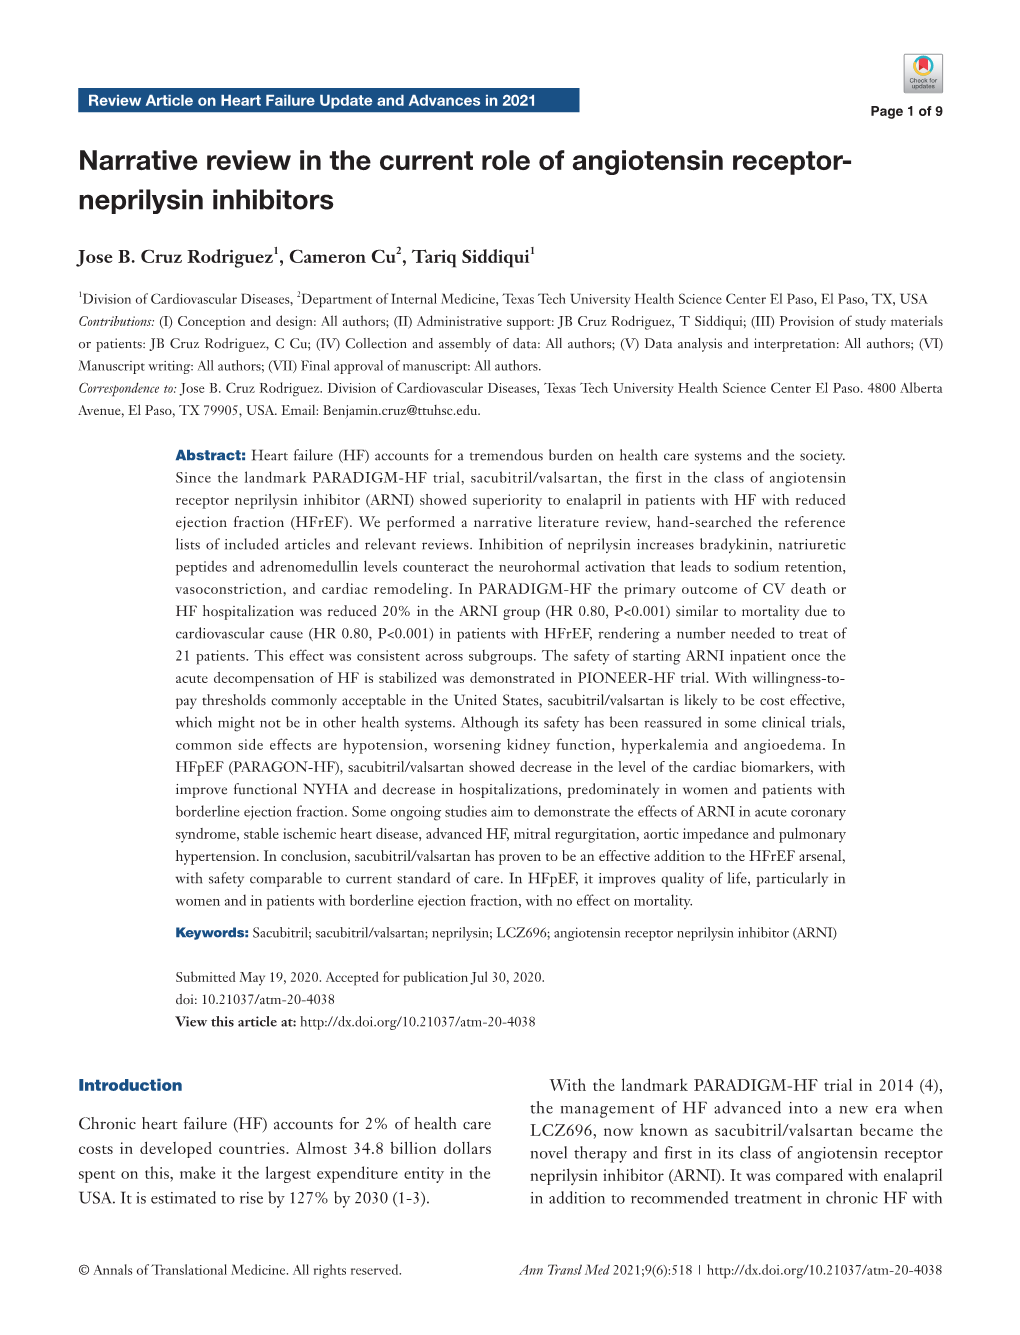 Narrative Review in the Current Role of Angiotensin Receptor- Neprilysin Inhibitors